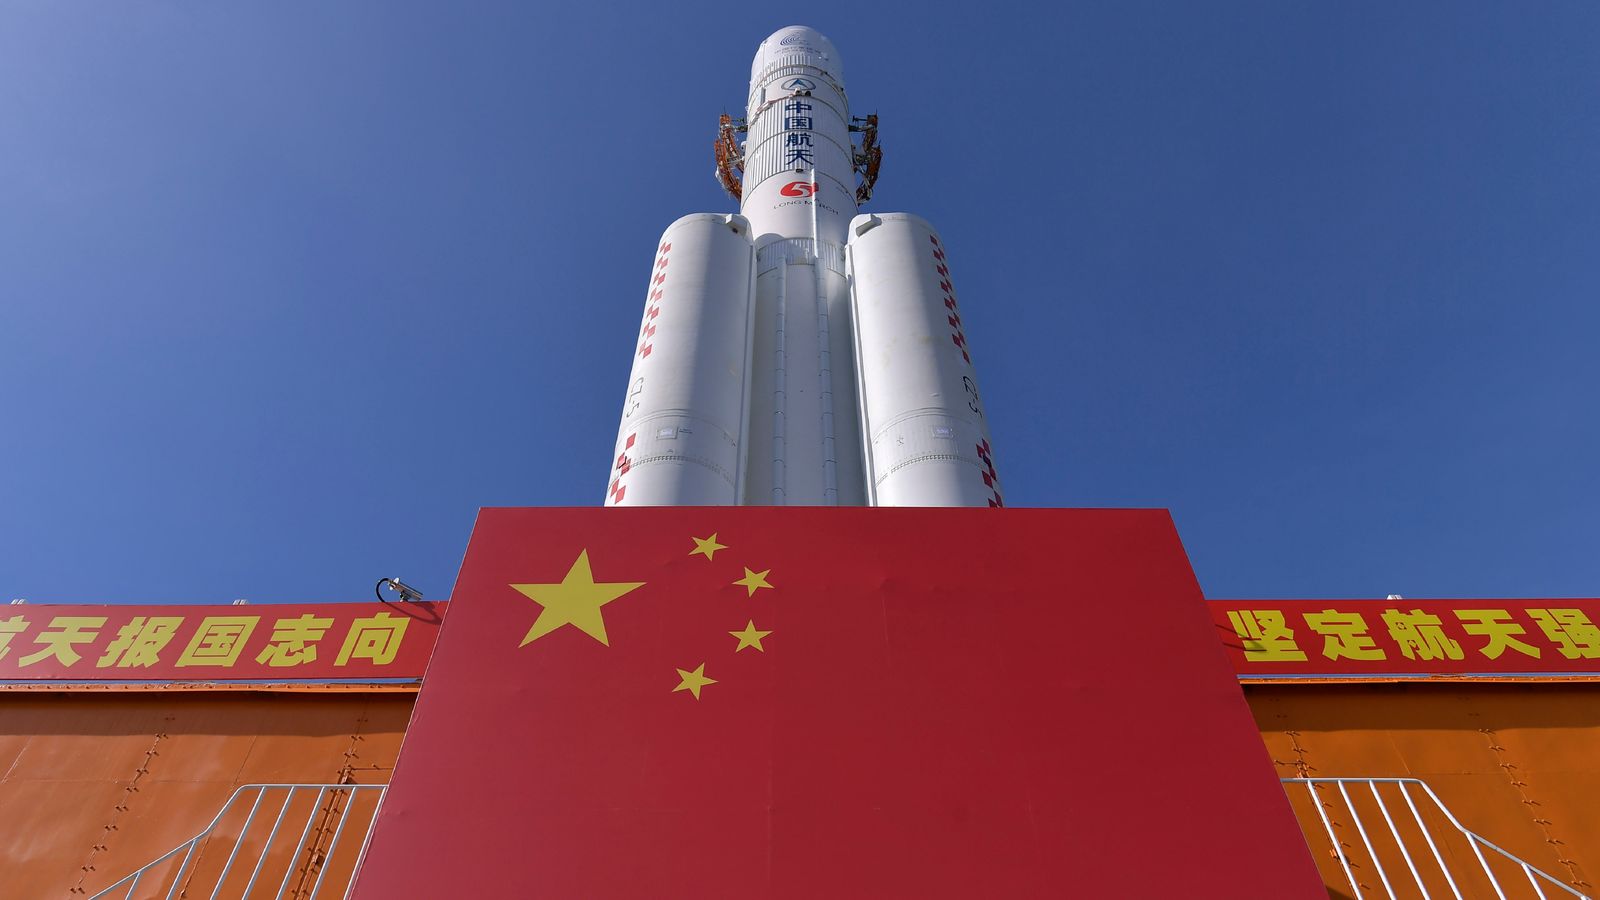 Mystery Chinese Spacecraft Returns to Earth After 276 Days